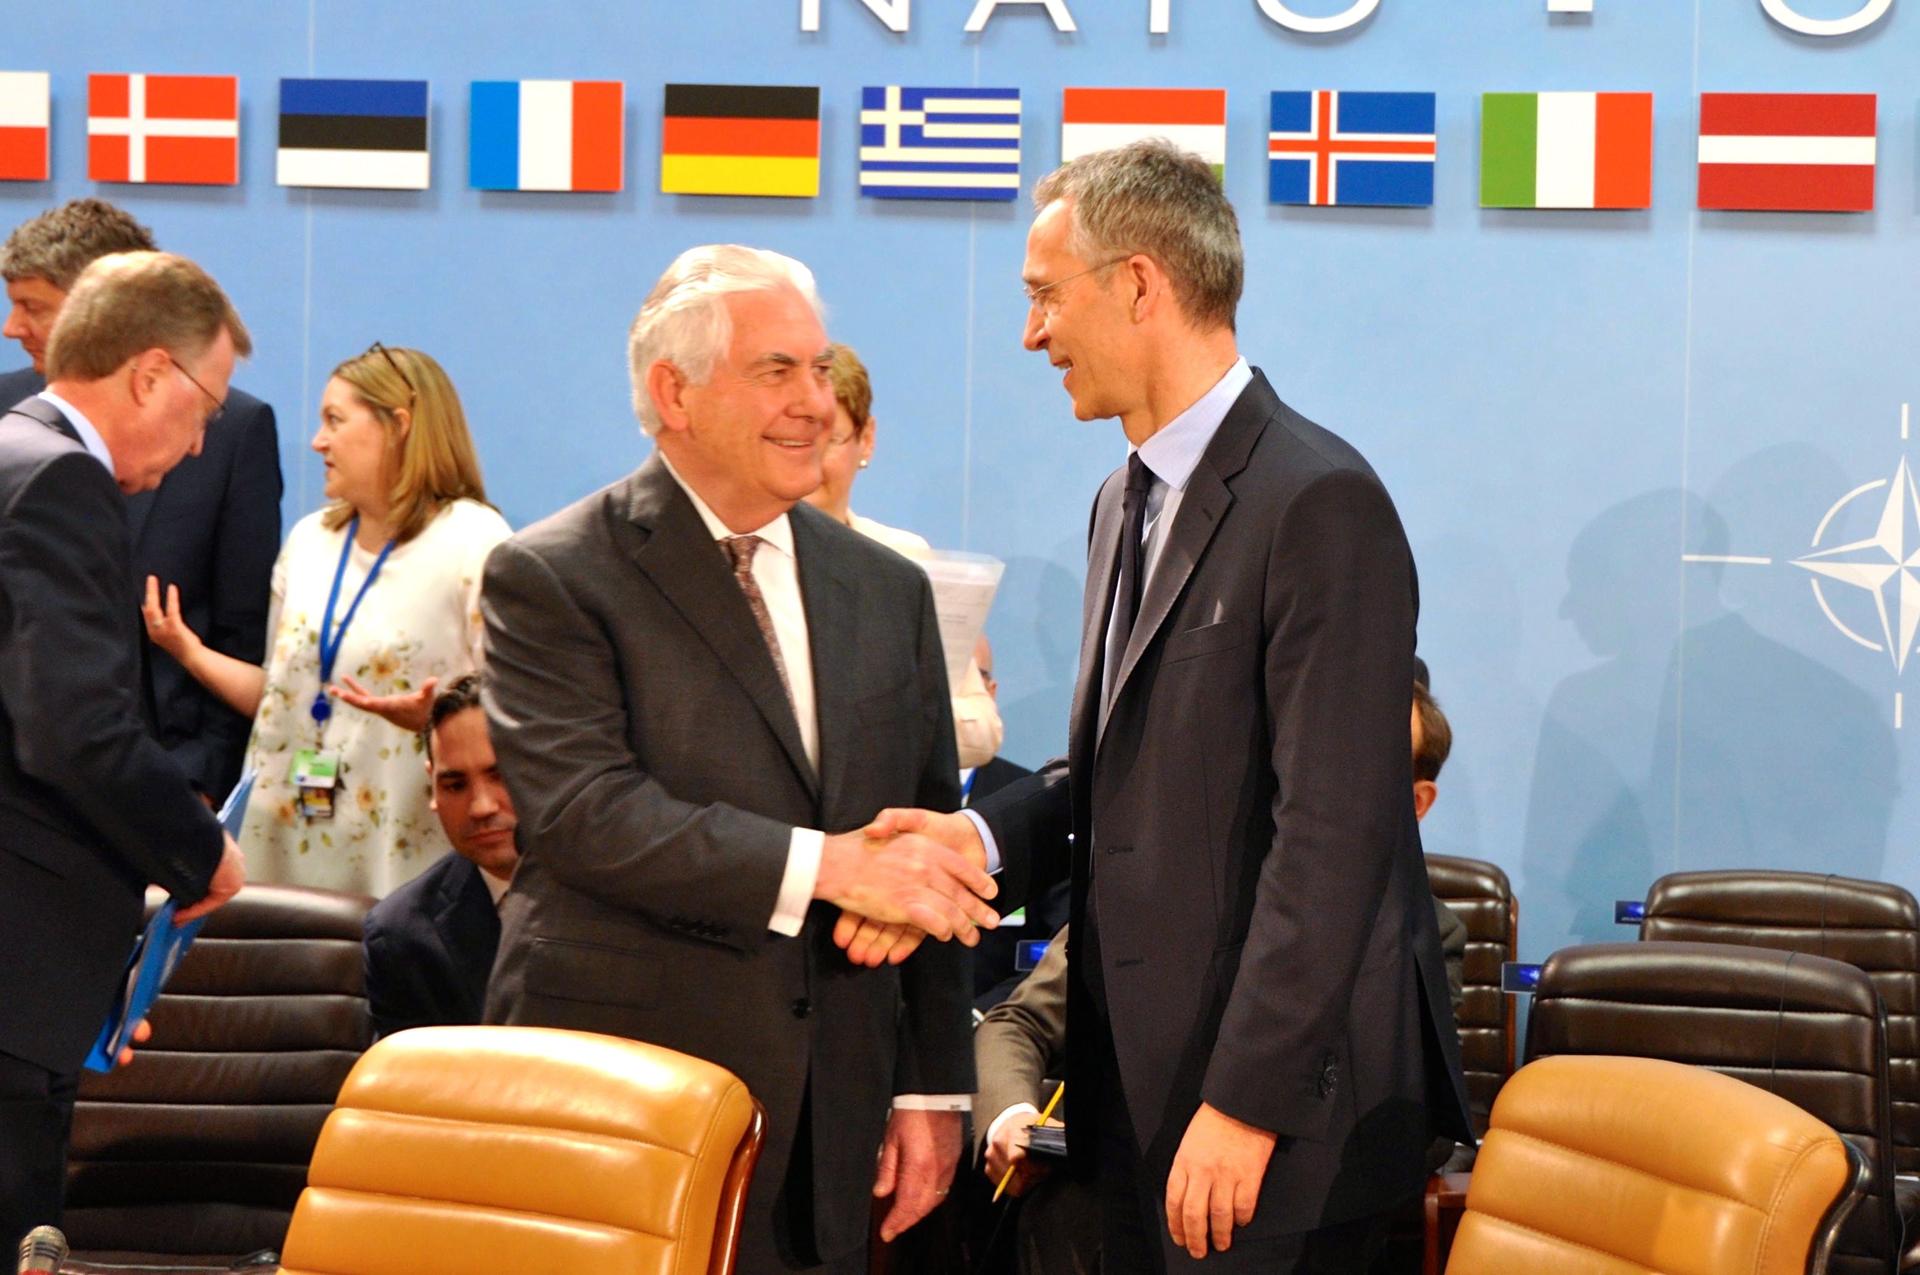 Secretary Tillerson Shakes Hands With NATO Secretary General Stoltenberg at NATO Foreign Ministerial in Brussels